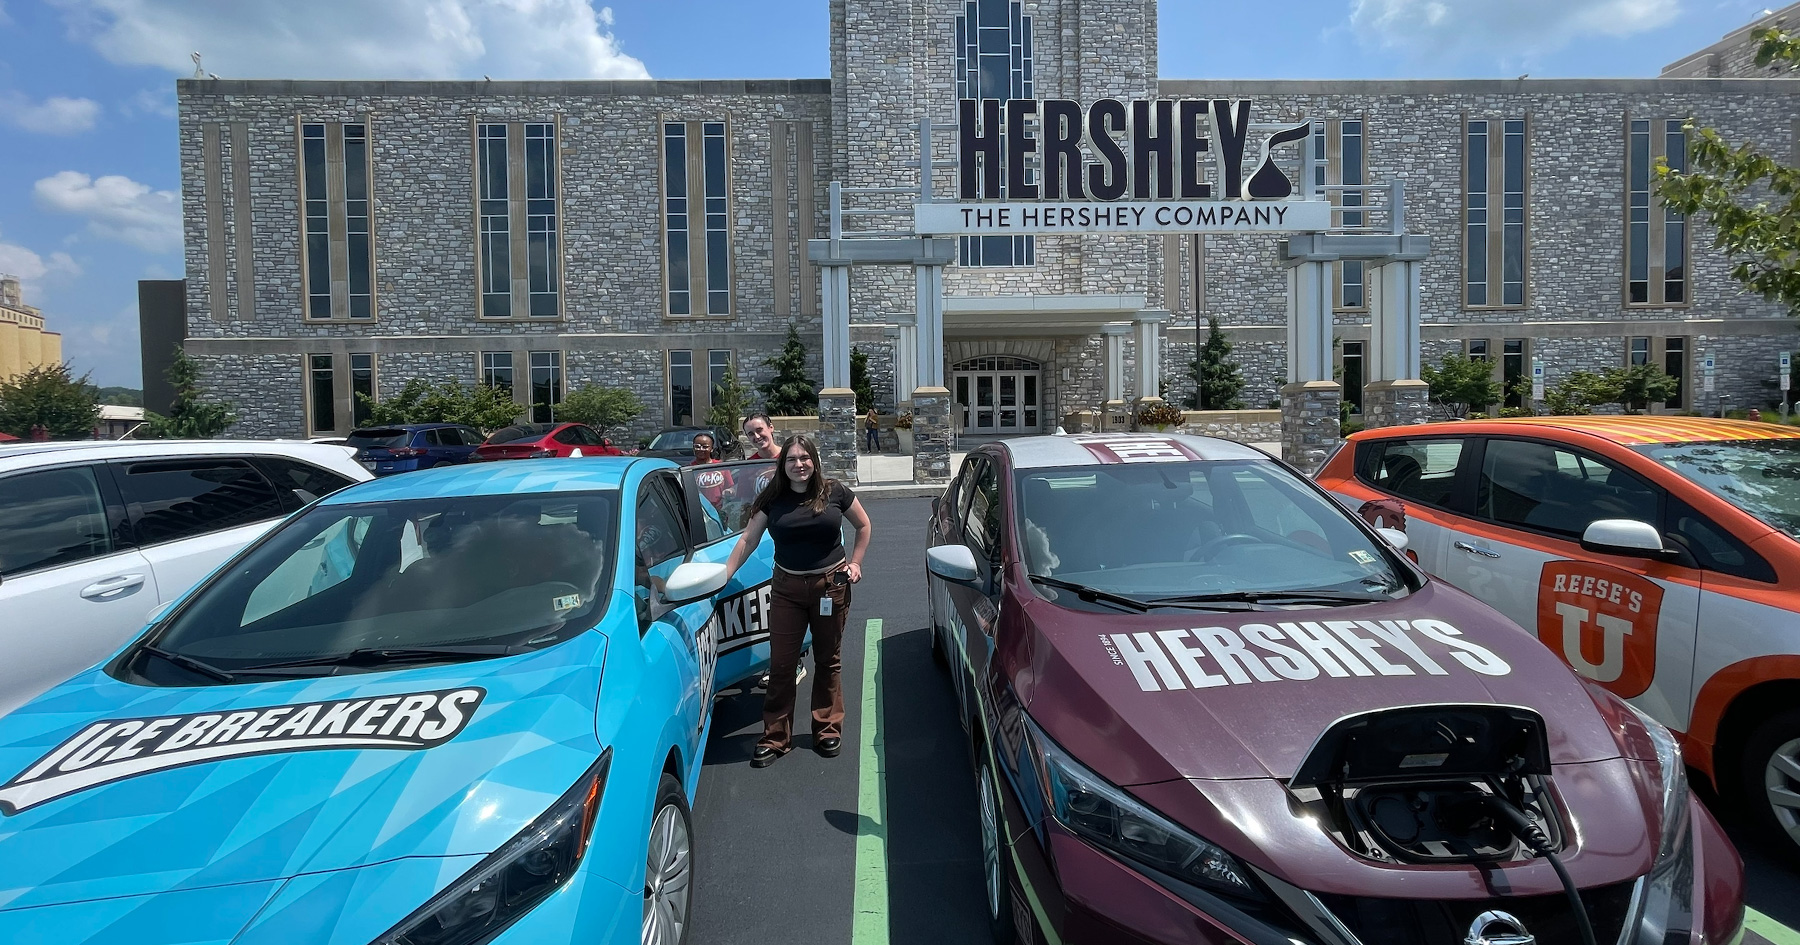 Barbara Montemayor Martinez stands next to Hershey-branded car in front of The Hershey Chocolate Company